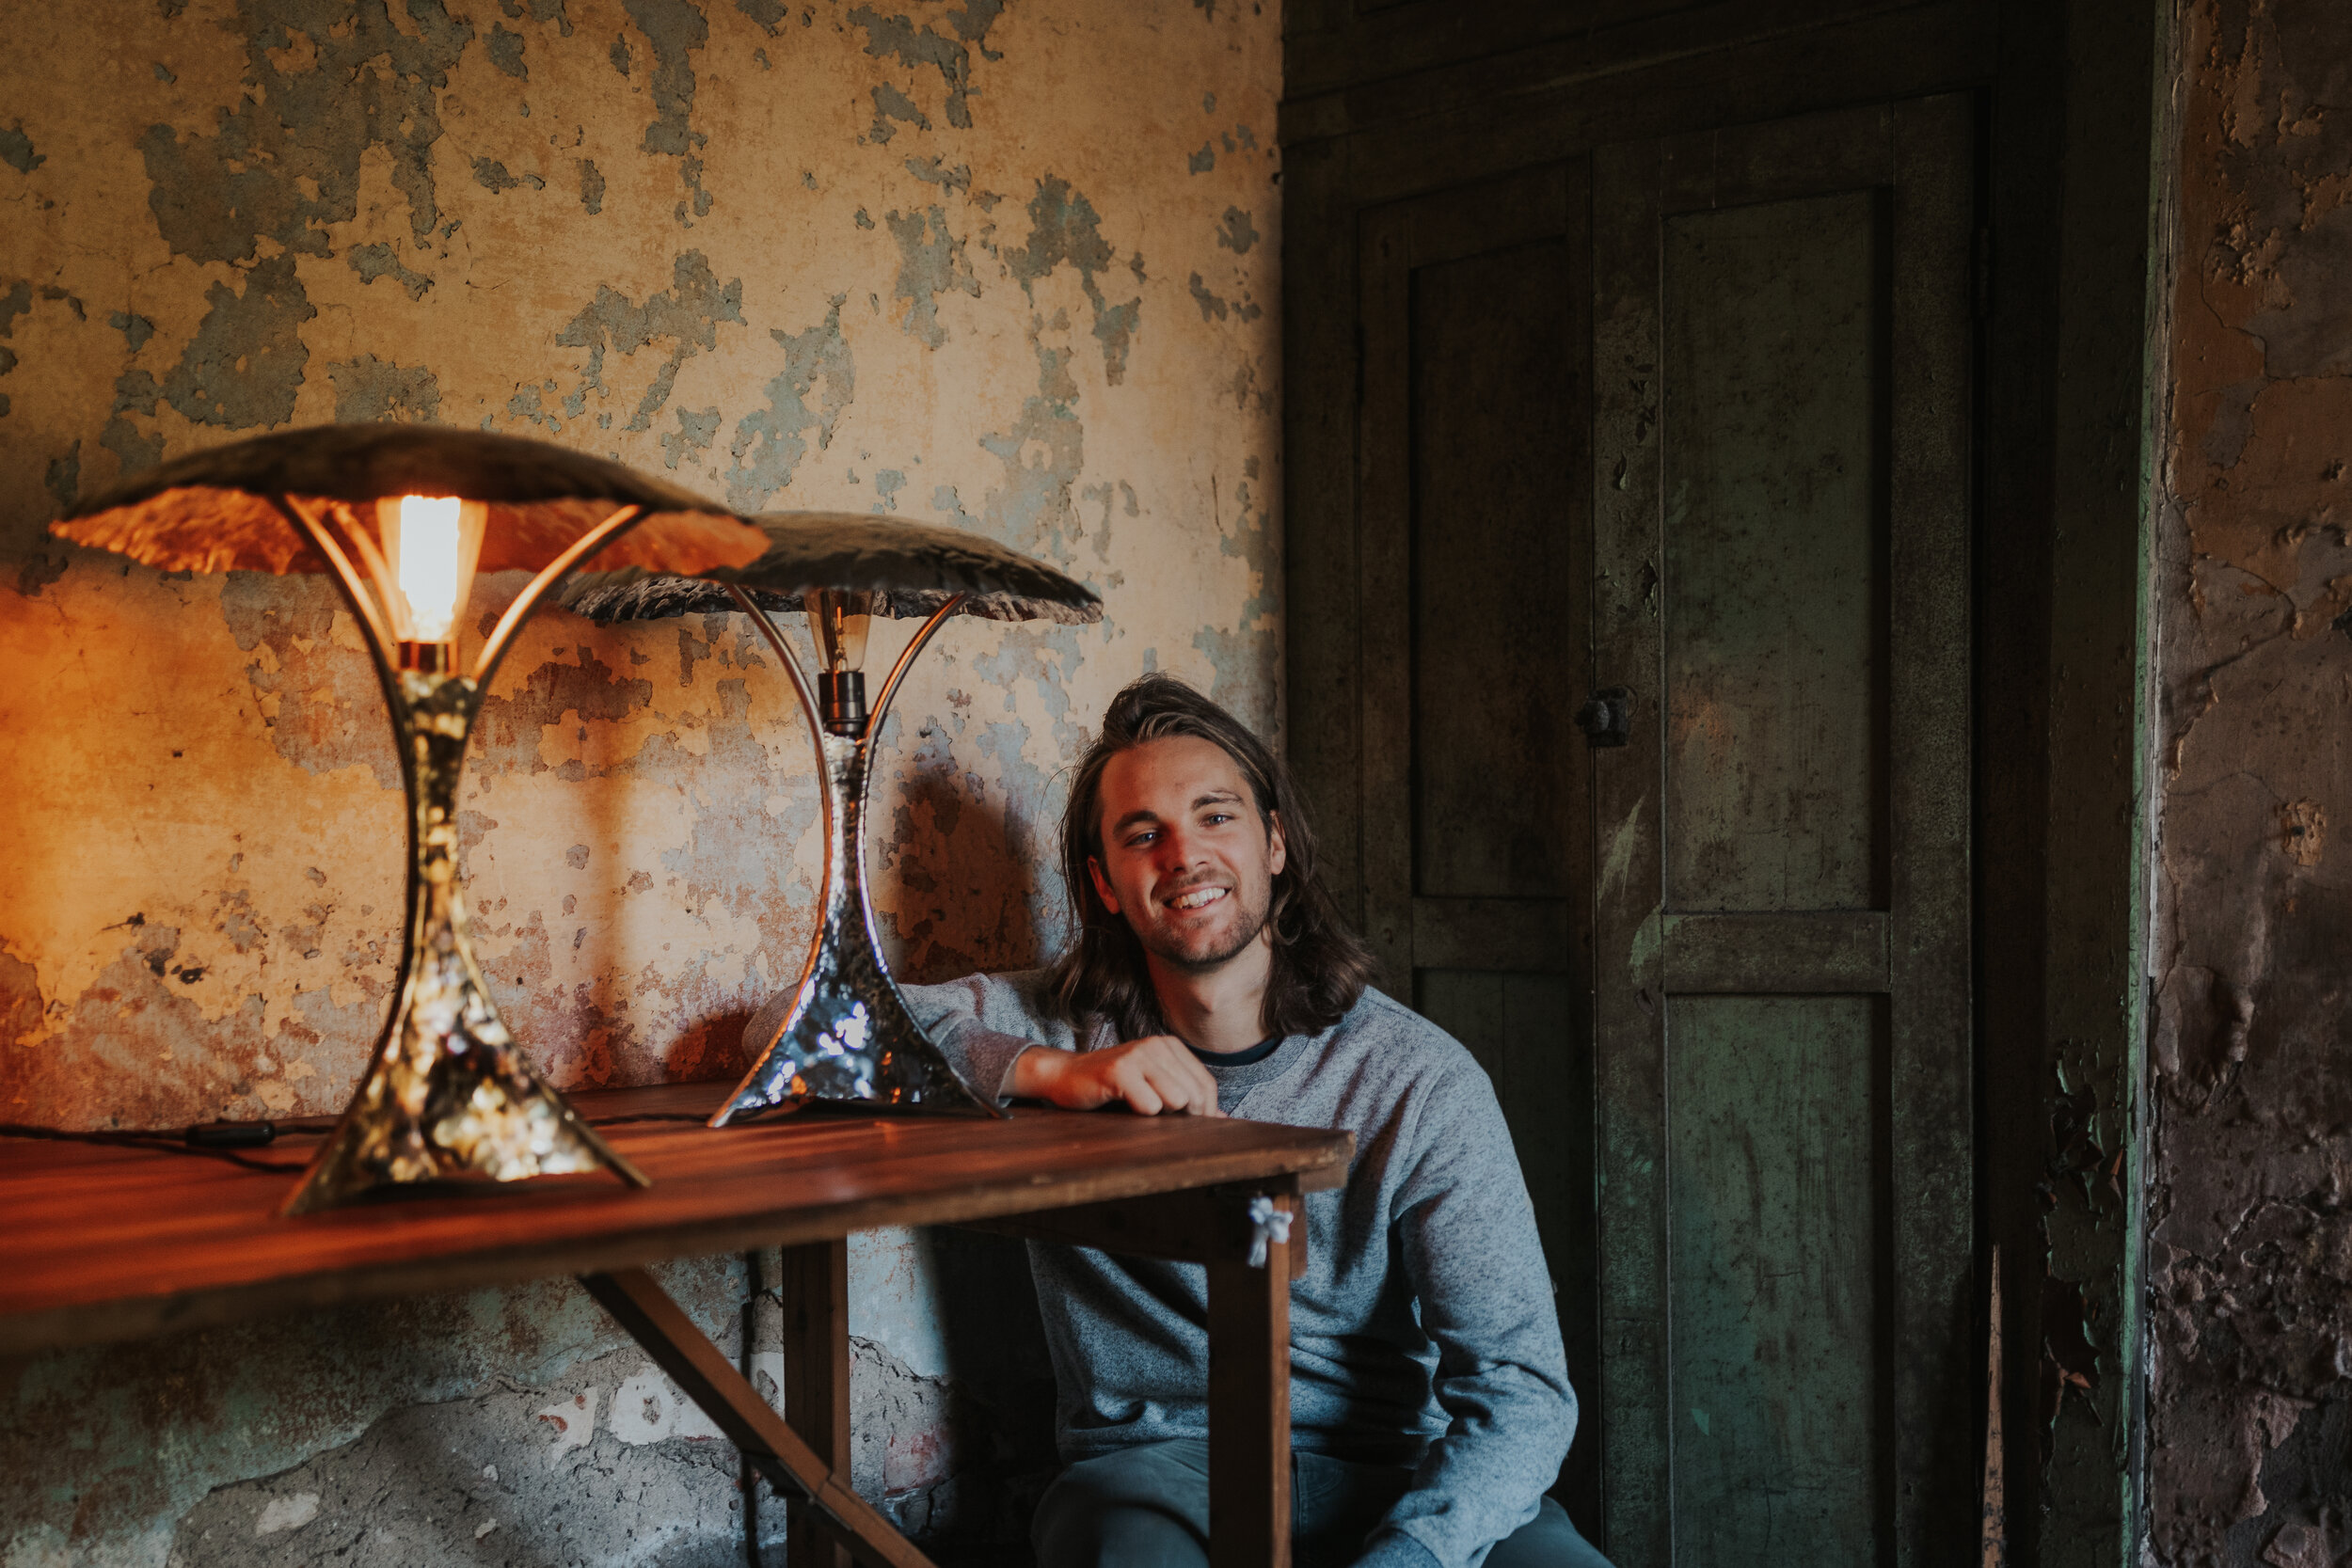 Ollie holman with Shroom Table Lamps. 